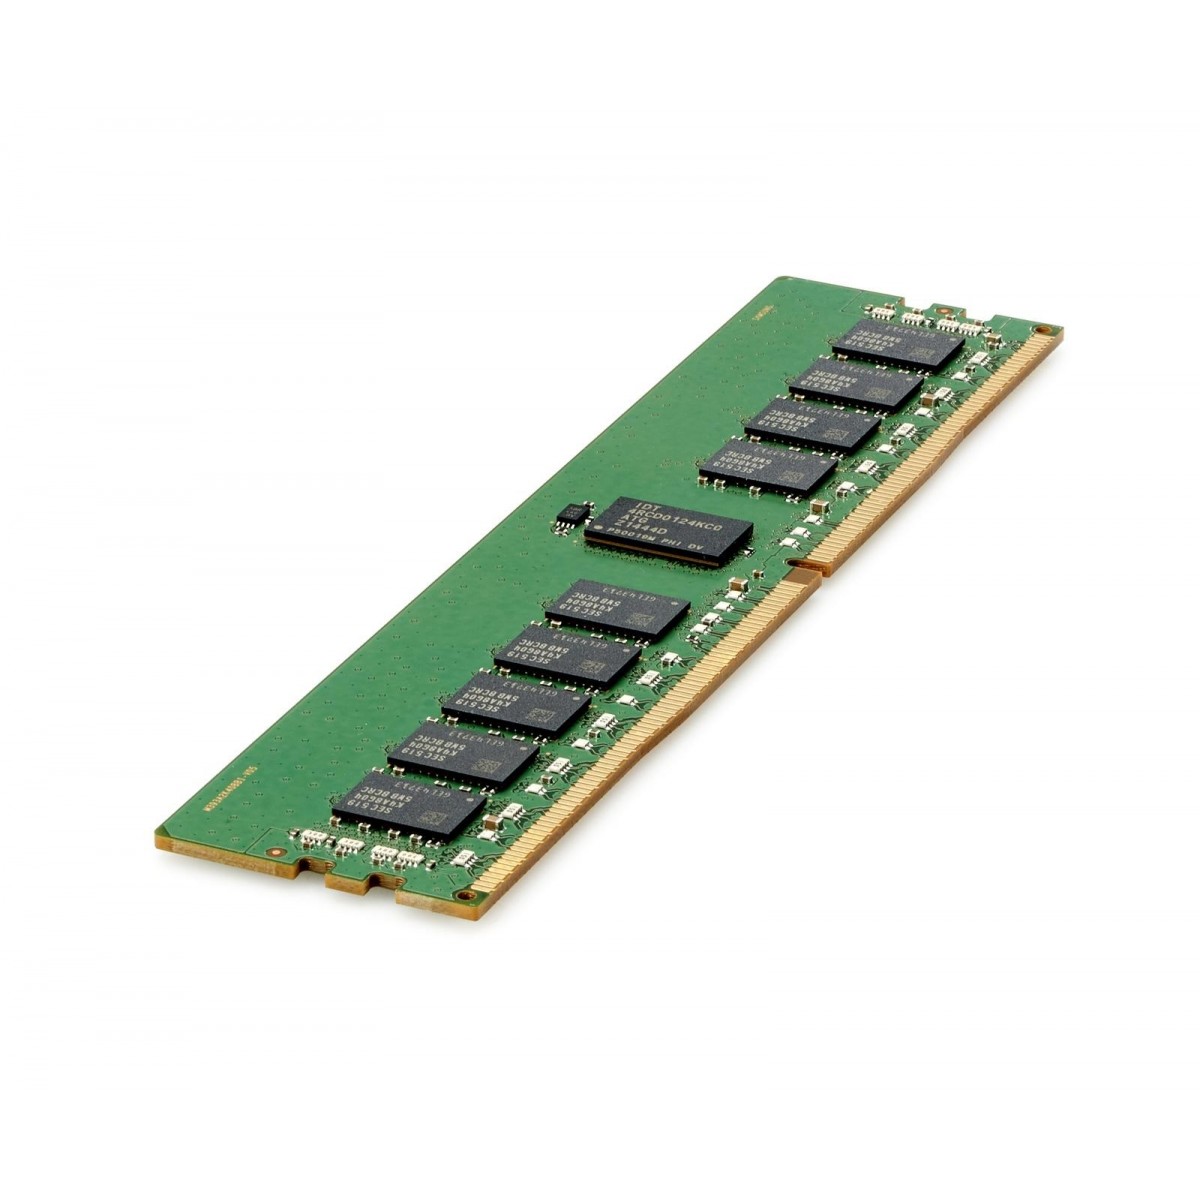 HPE SmartMemory RAM Module for Server, Database Appliance - 32 GB (1 x 32GB) - DDR4-3200/PC4-25600 DDR4 SDRAM - 3200 MHz Dual-ra